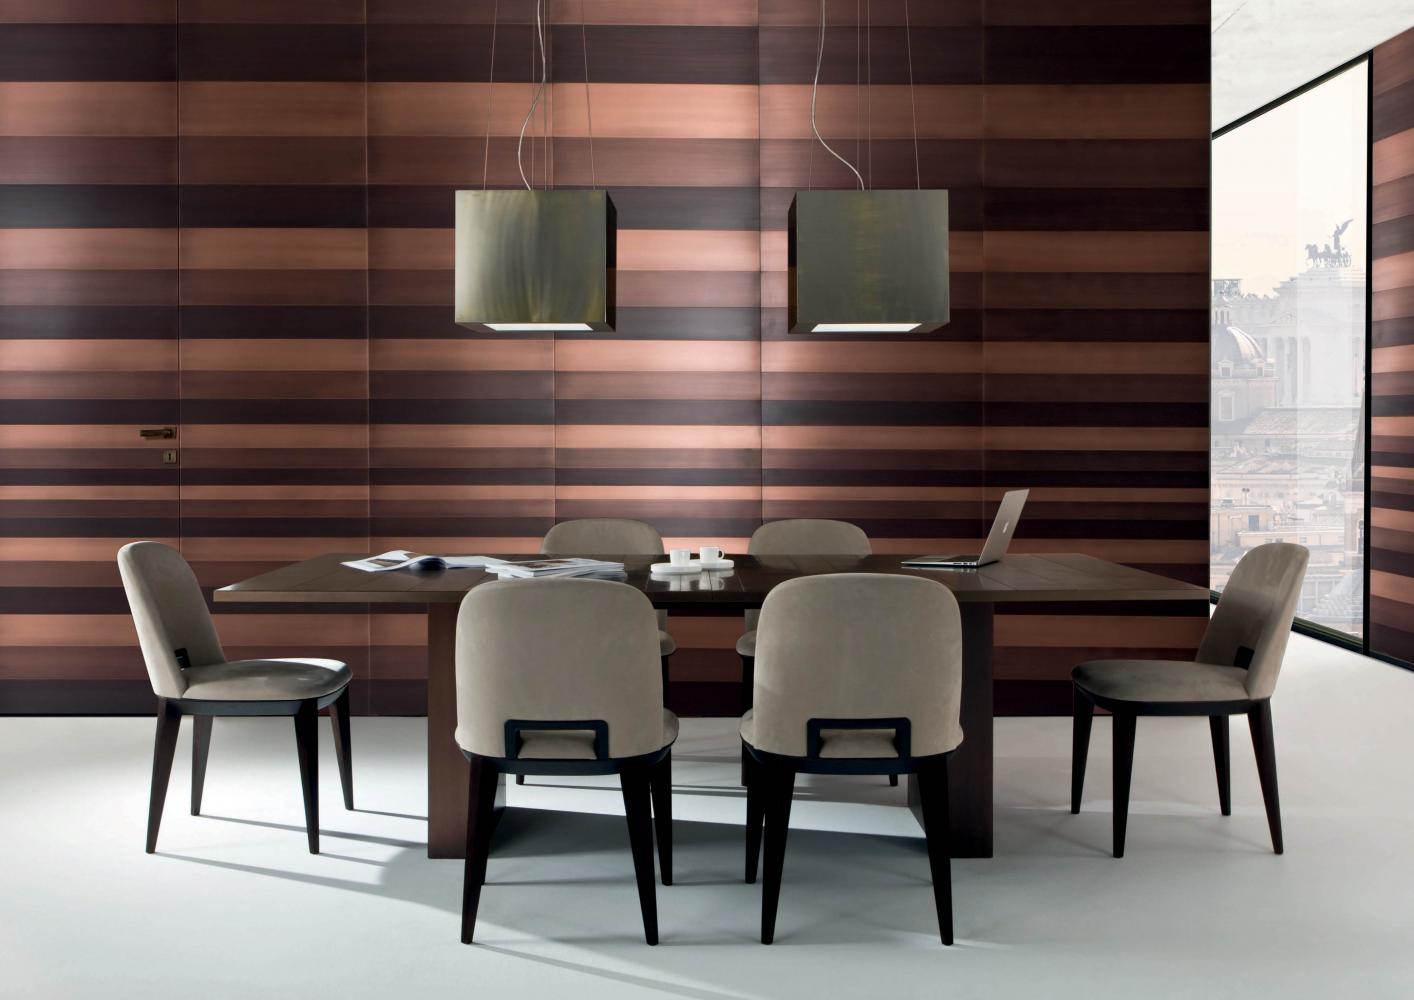 laurameroni stars collection modern doors and wall panels in burnished copper